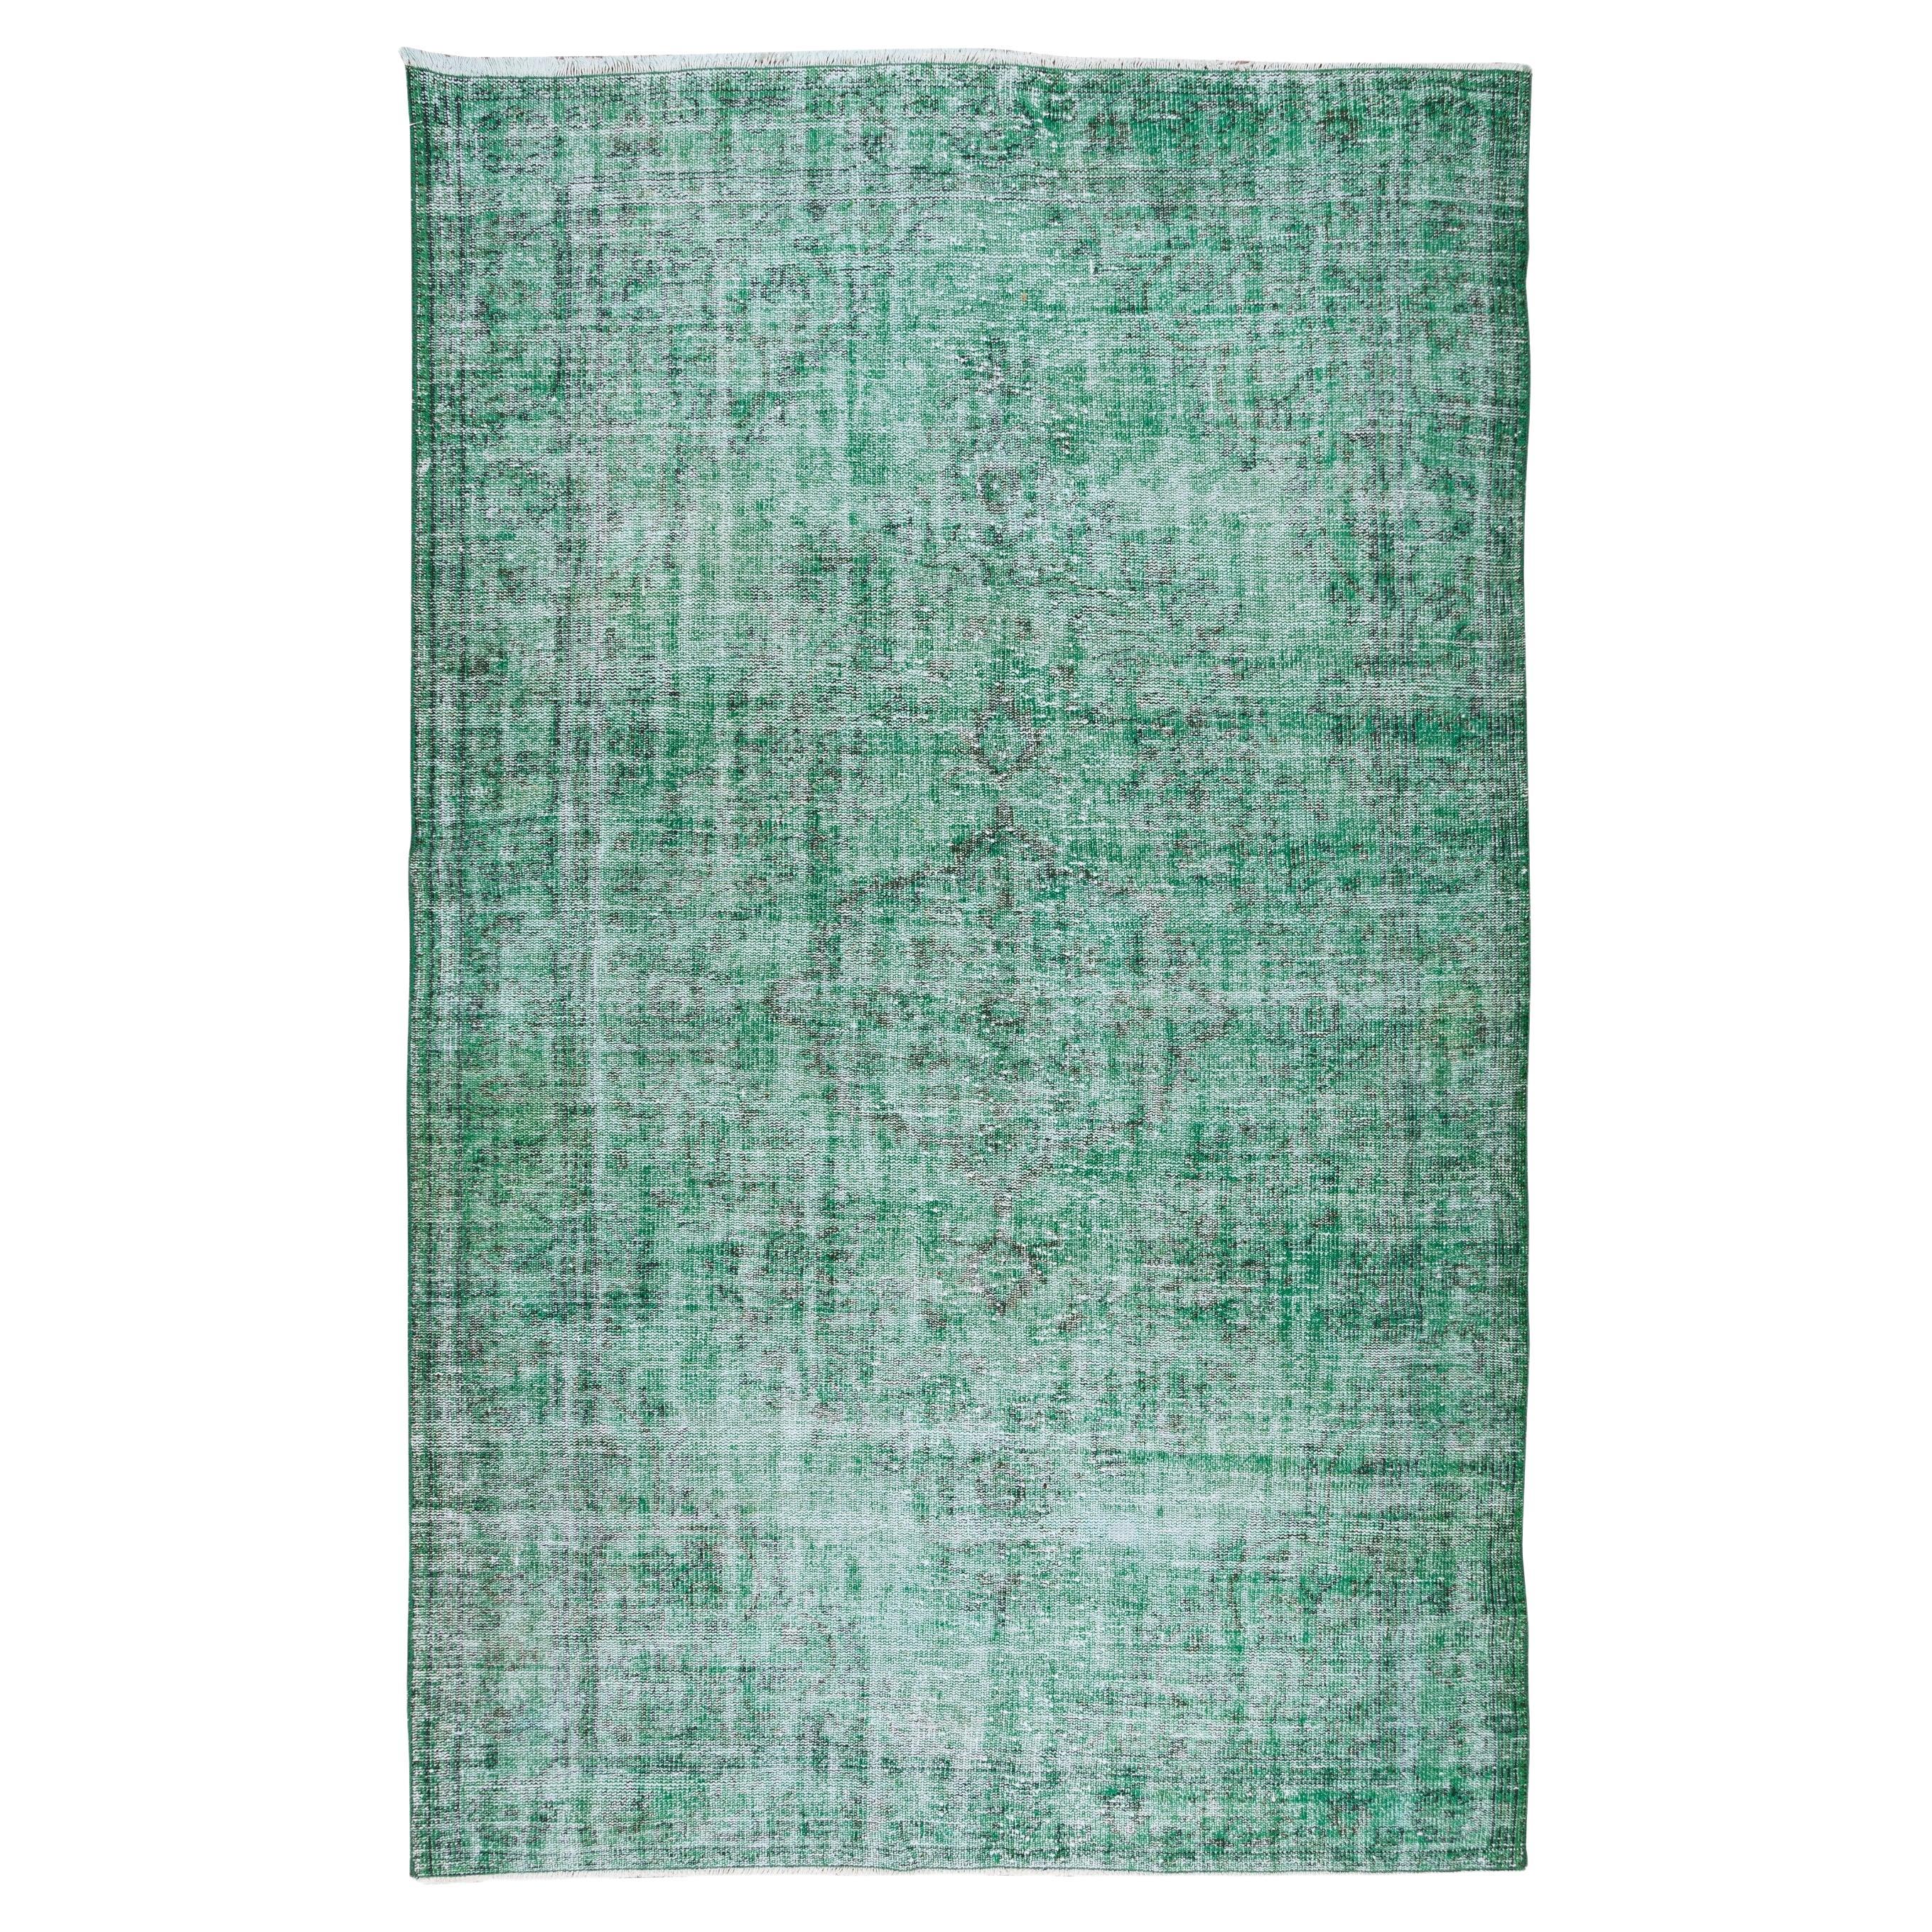 6x9.6 Ft Modern Green Area Rug, Hand Knotted Anatolian Vintage Wool Carpet